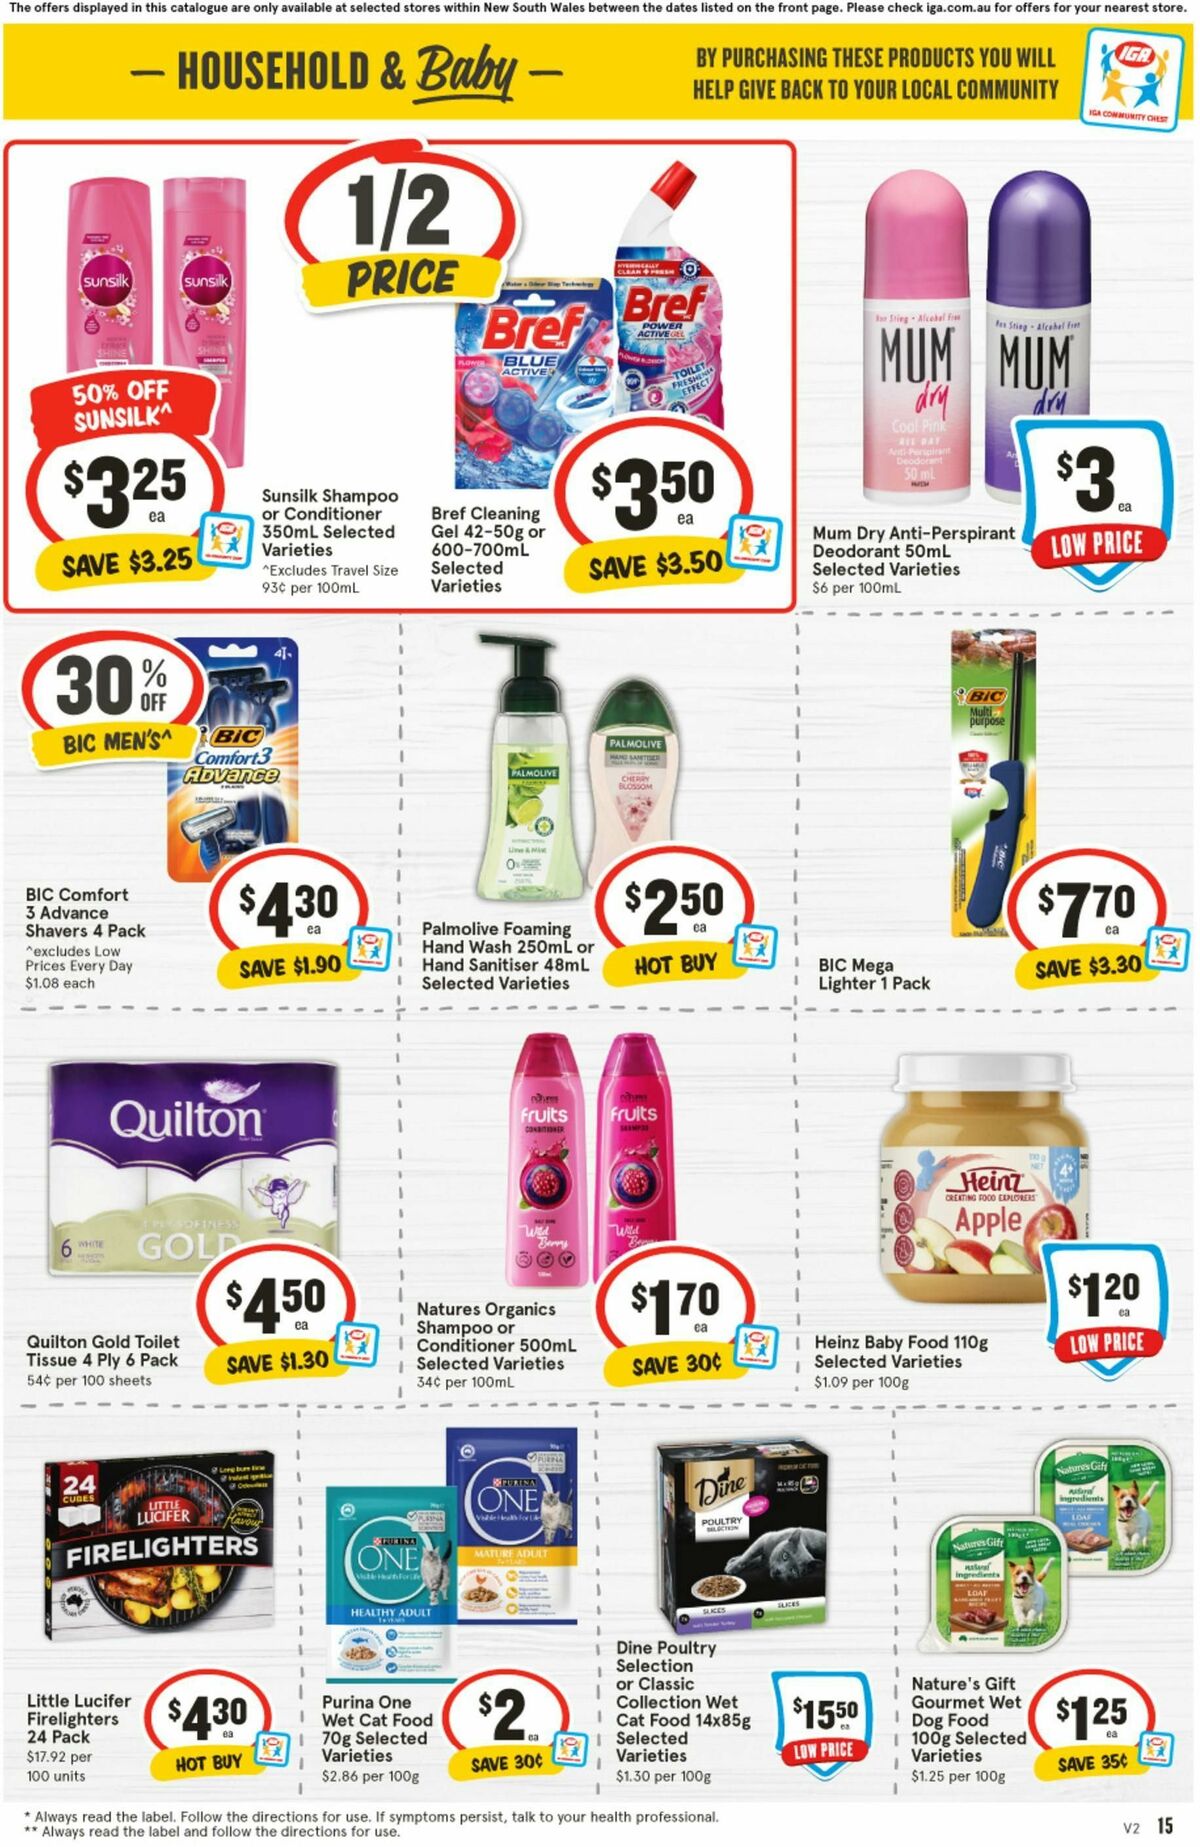 IGA Catalogues from 2 August